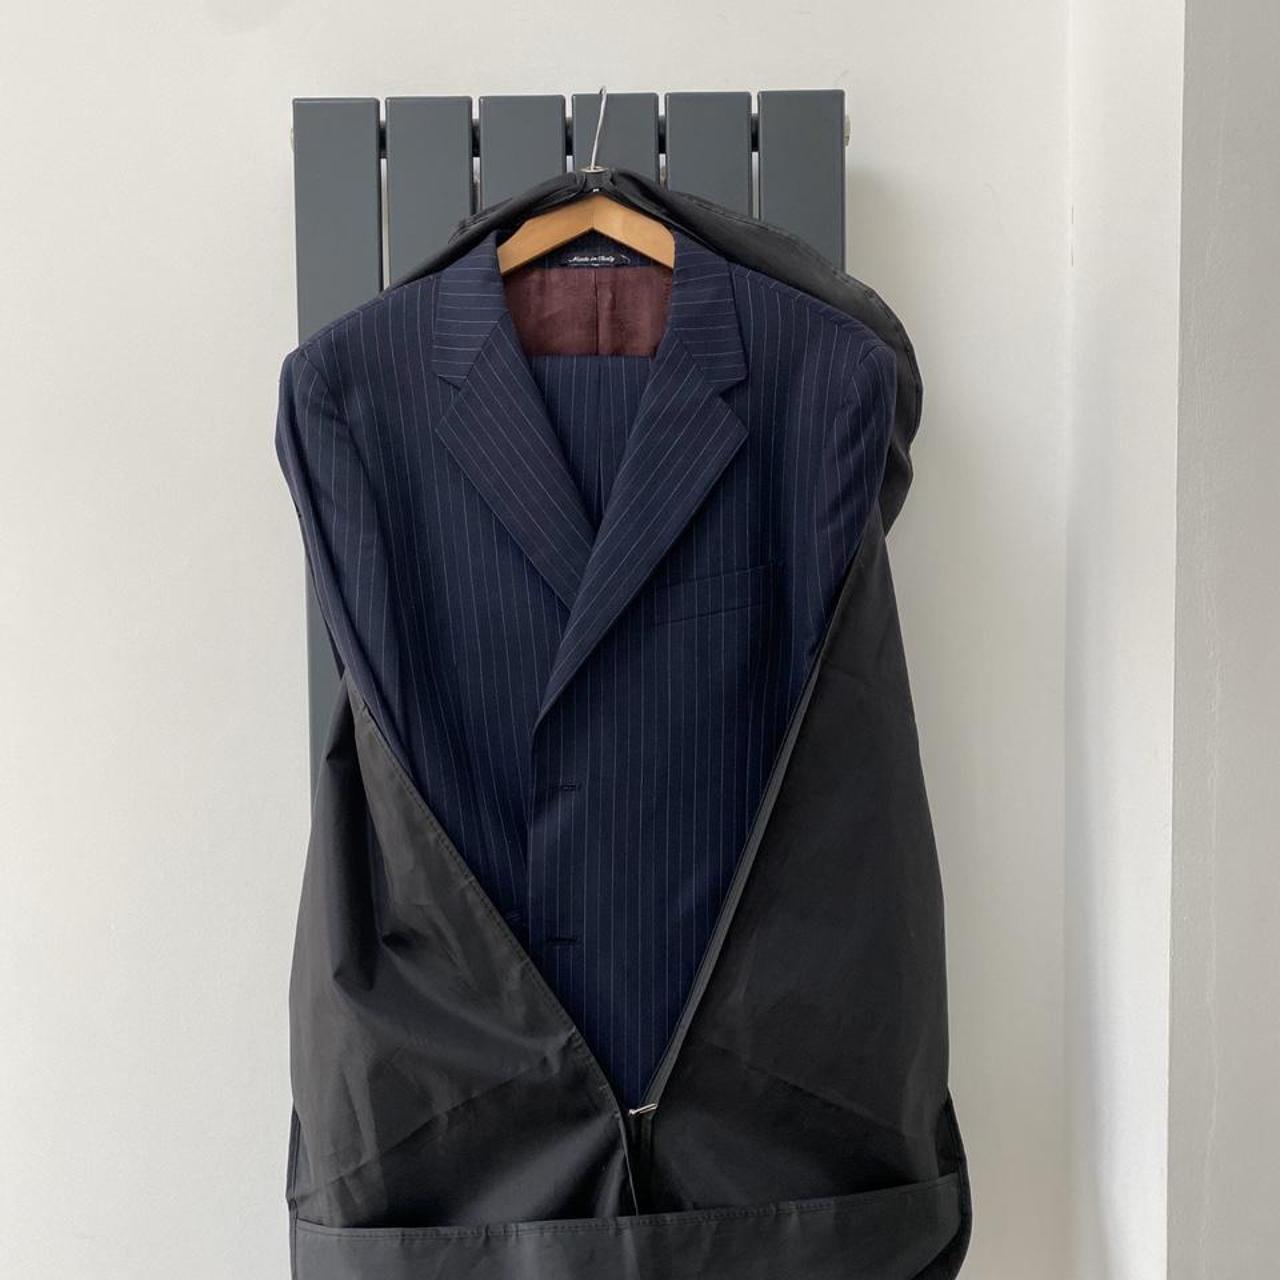 Made to measure Paul Smith navy blue with light ... - Depop